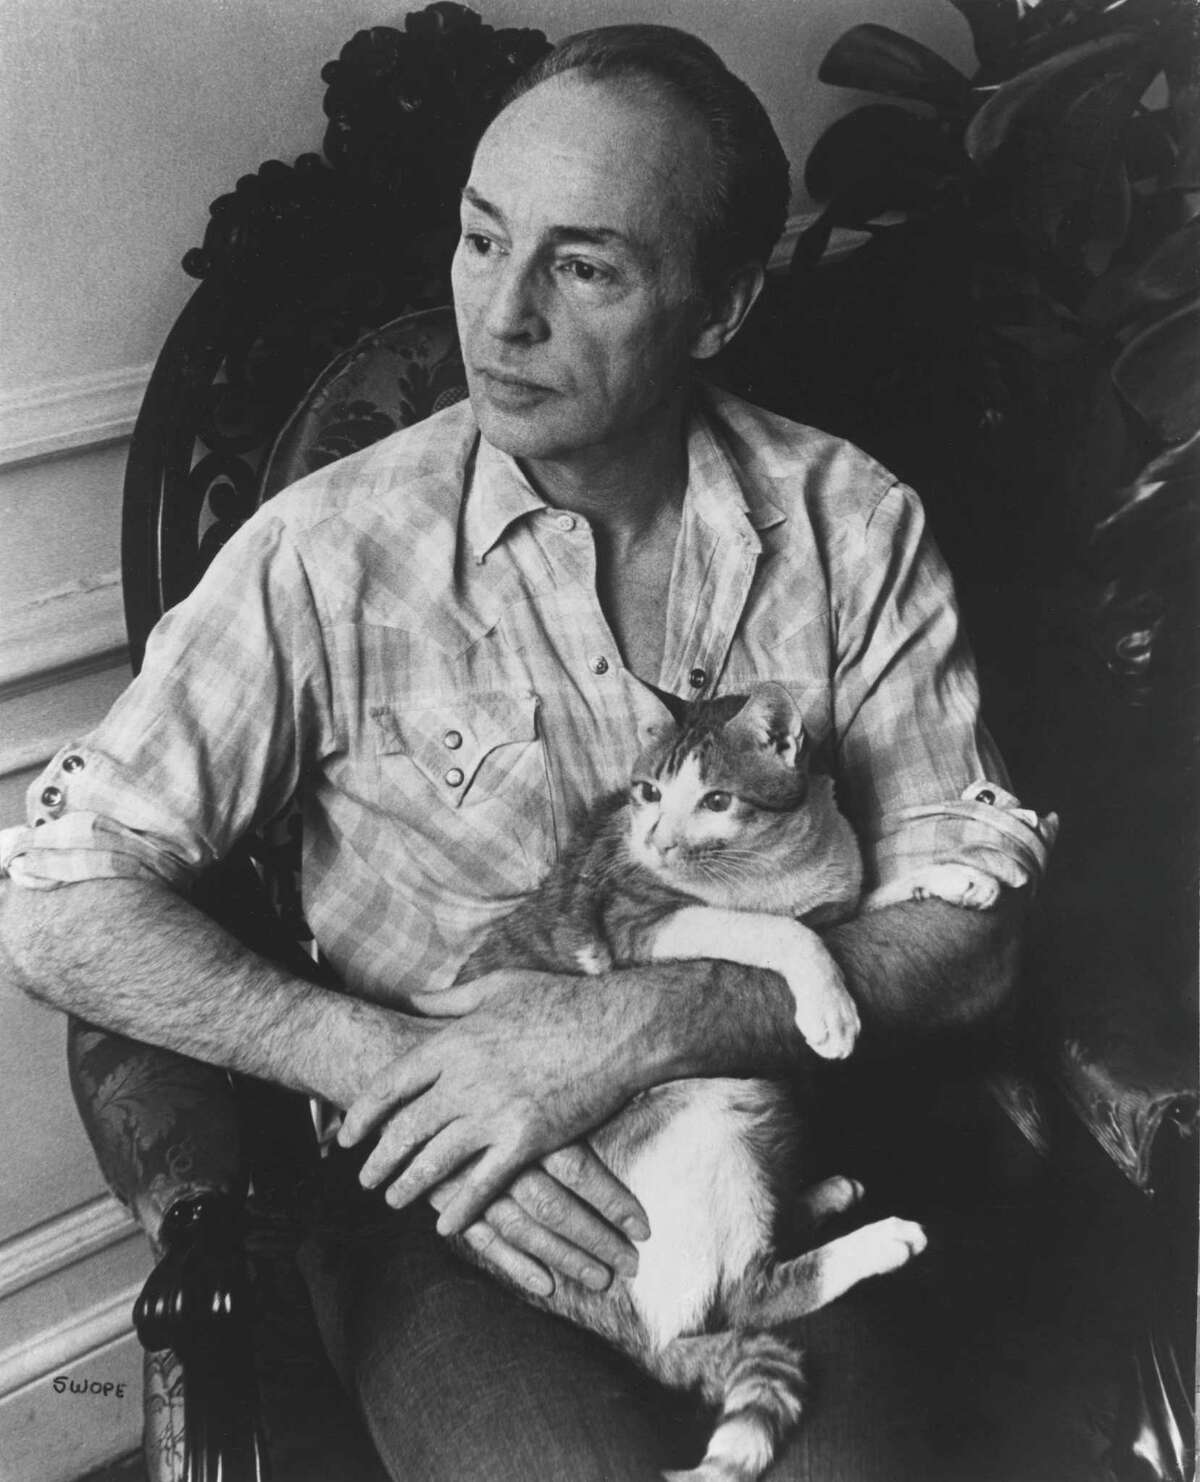 To celebrate the centennial of his birth, AMERICAN MASTERS is planning to re-broadcast the acclaimed, but long unseen, "Balanchine, Parts I & II" airing on PBS January 14, 2004 at 9:30 p.m. (check local listings). Regarded as the "father of American ballet," George Balanchine's legacy lives on in his prolific body of choreographic work, work which revolutionized ballet and balletmaking. Originally filmed in 1984, shortly after his death, the two-part Balanchine celebrates the history of his career and is a tribute to the themes of his ballets. Photo Credit: Martha Swope. Usage: For editorial use in North America only in conjunction with the direct publicity or promotion of AMERICAN MASTERS. No other rights are granted. All rights reserved. HOUCHRON CAPTION (01/14/2004): "American Masters" celebrates the life and times of George Balanchine with the long unseen "Balanchine, Parts I and II."